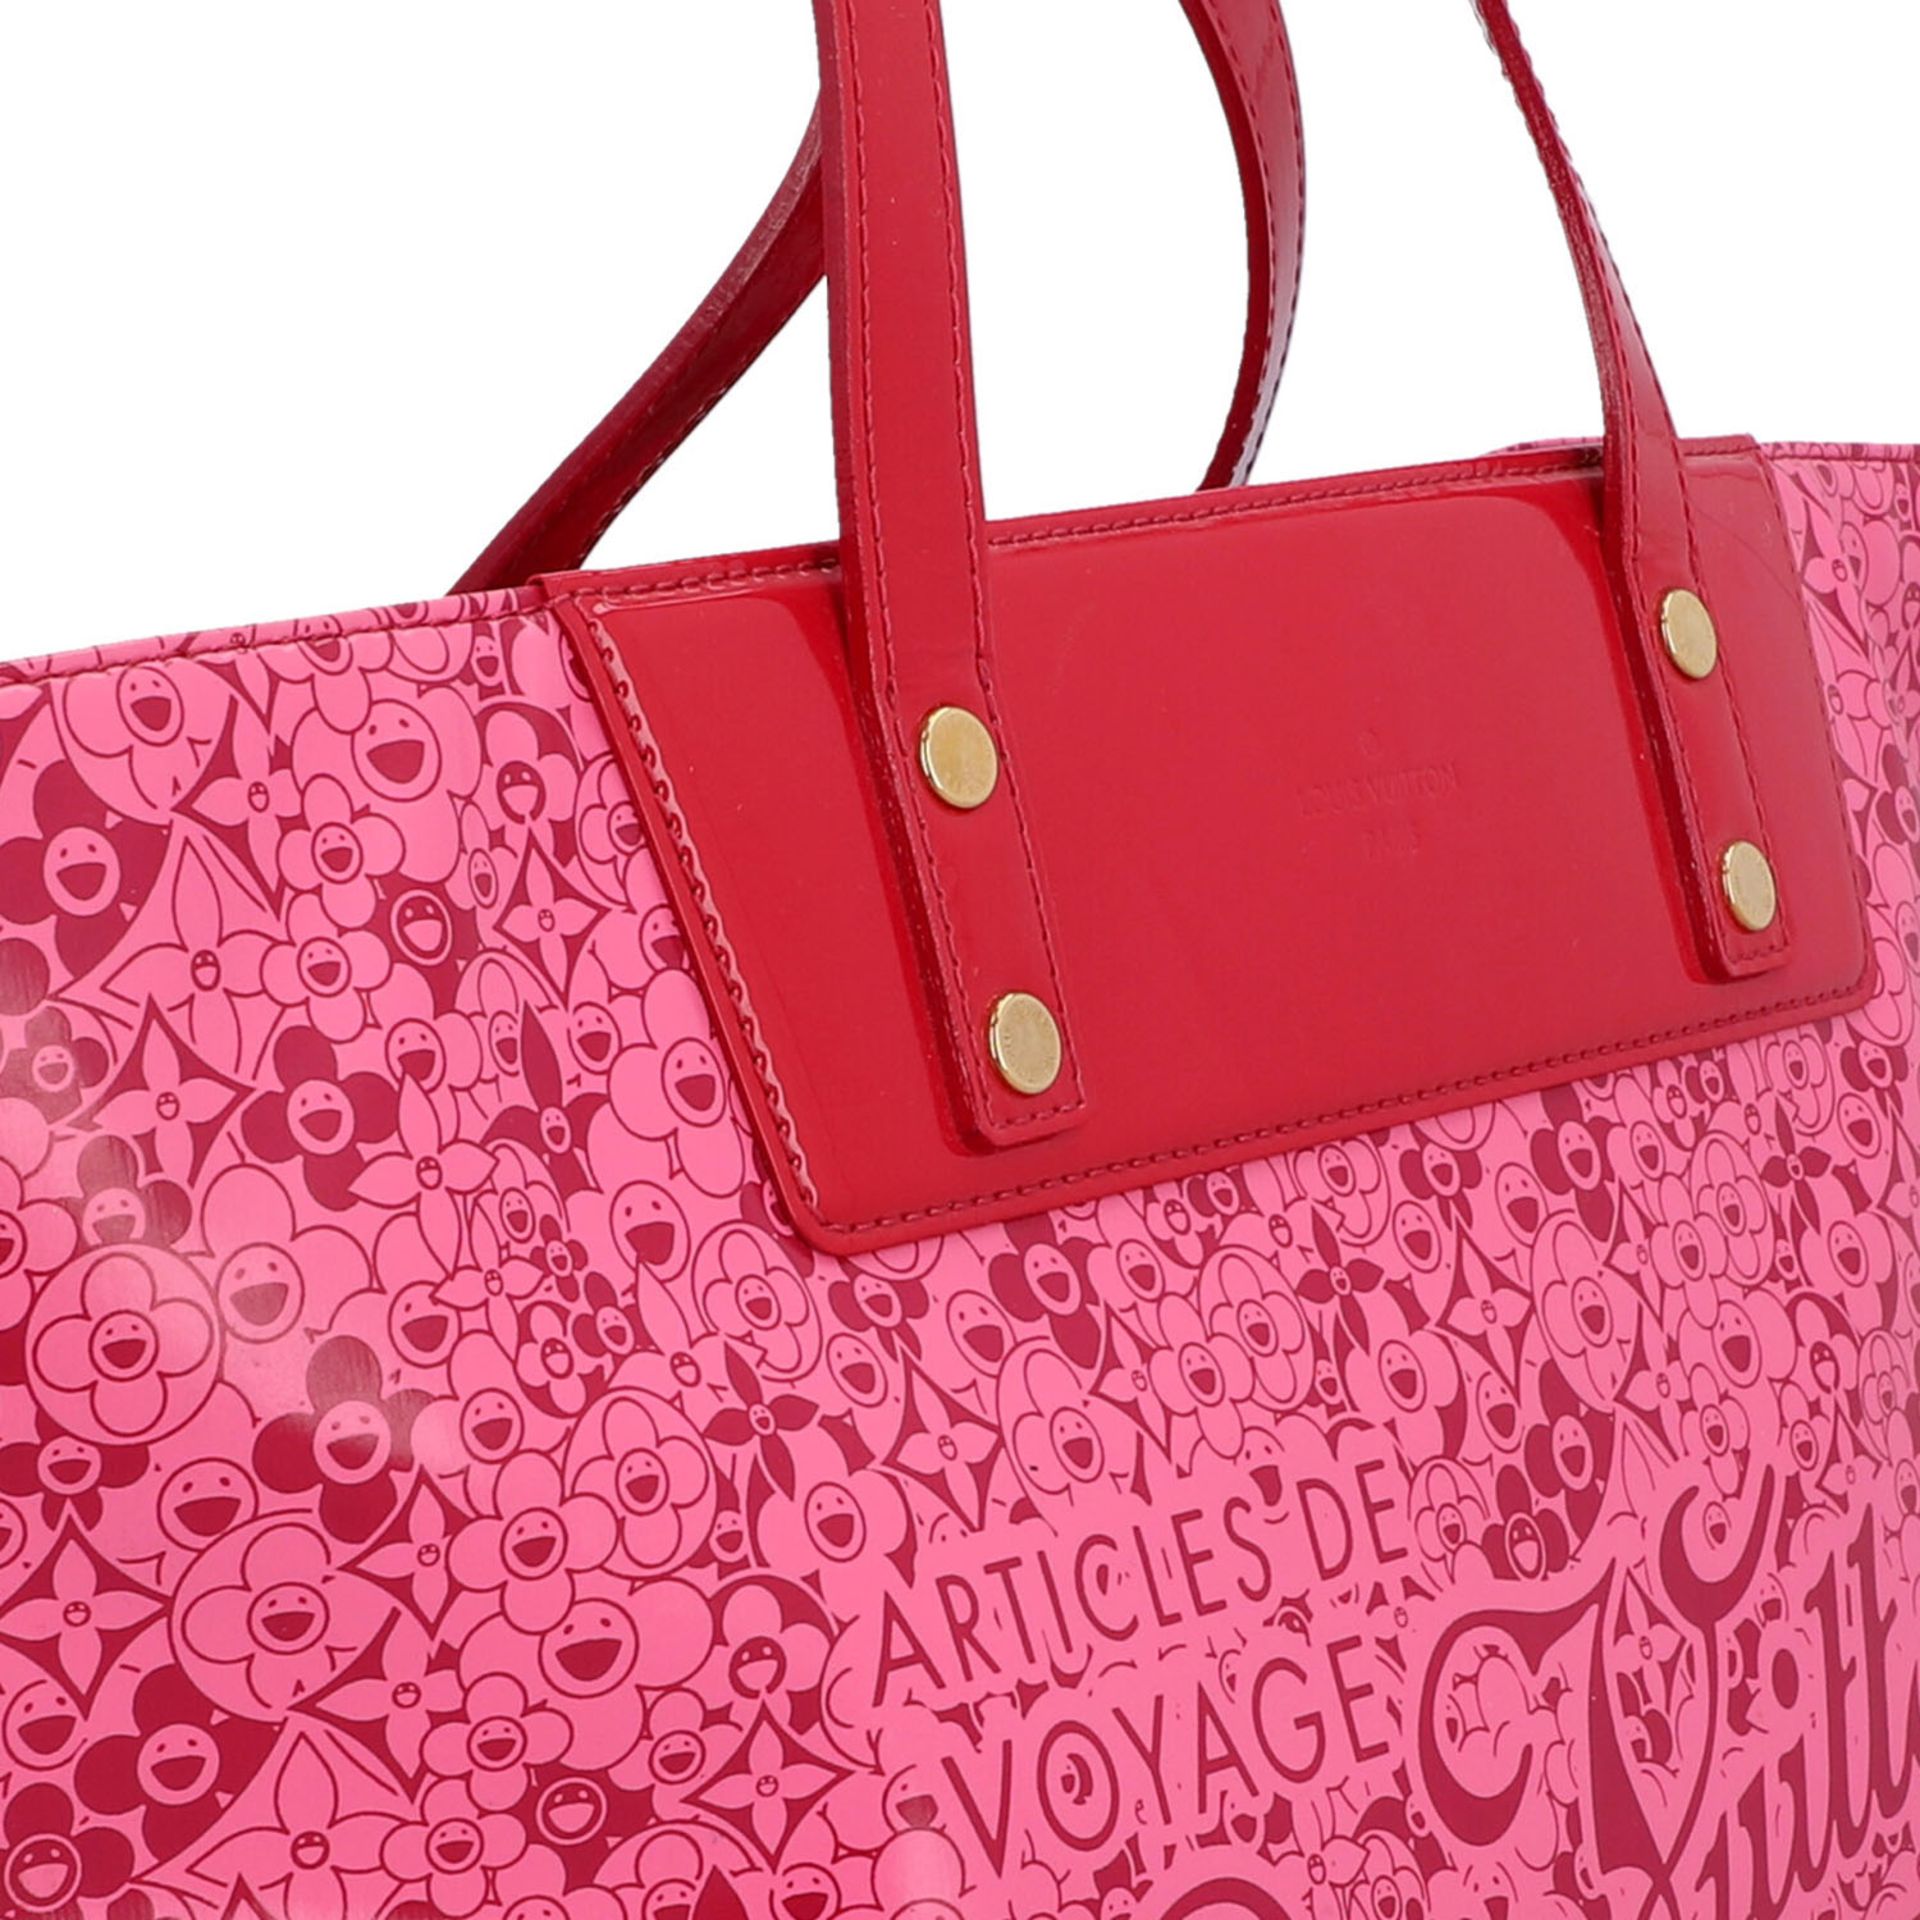 LOUIS VUITTON Shopper "COSMIC BLOSSOM TOTE". - Image 8 of 8